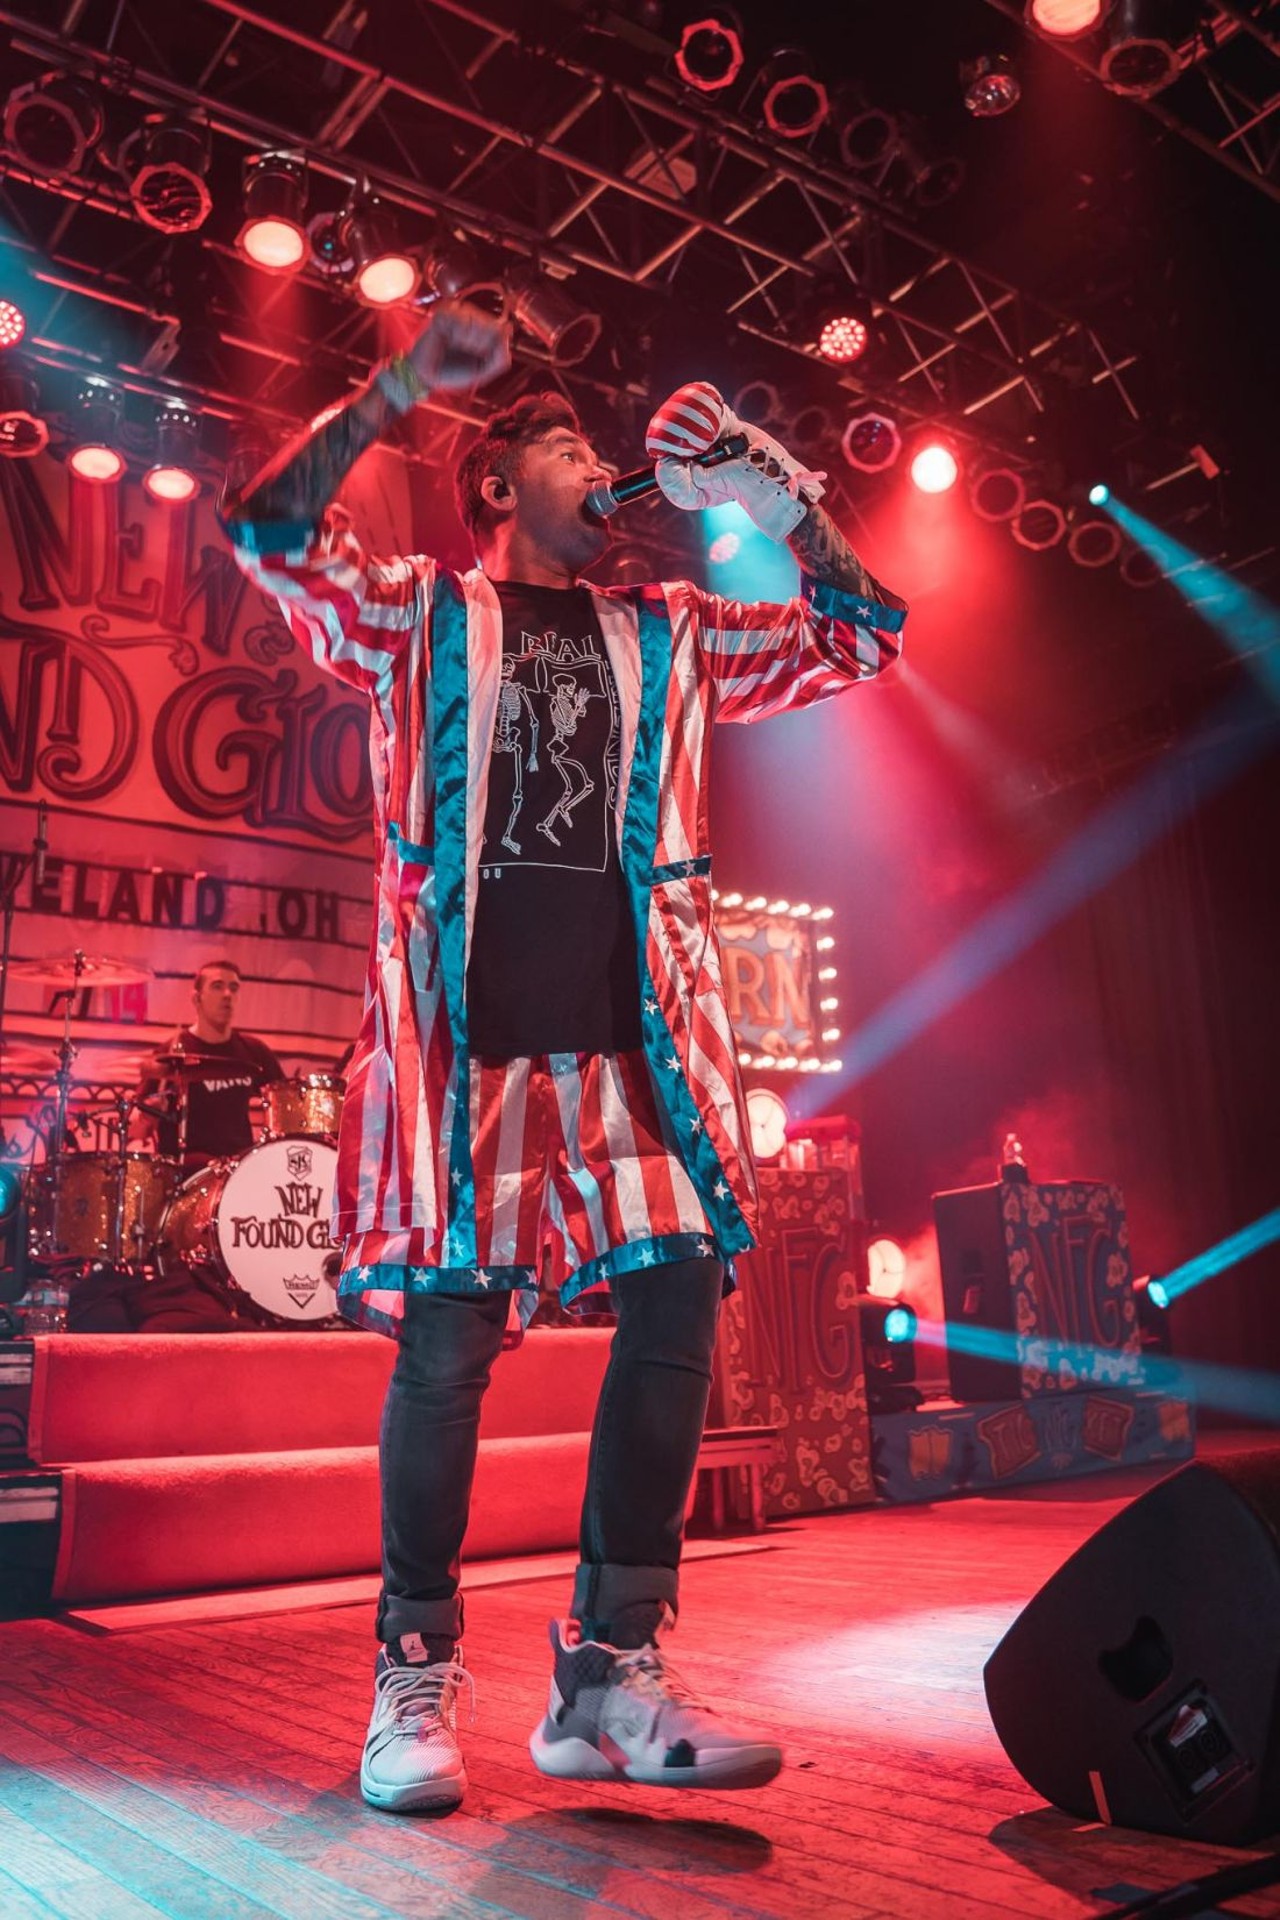 New Found Glory Performing at House of Blues